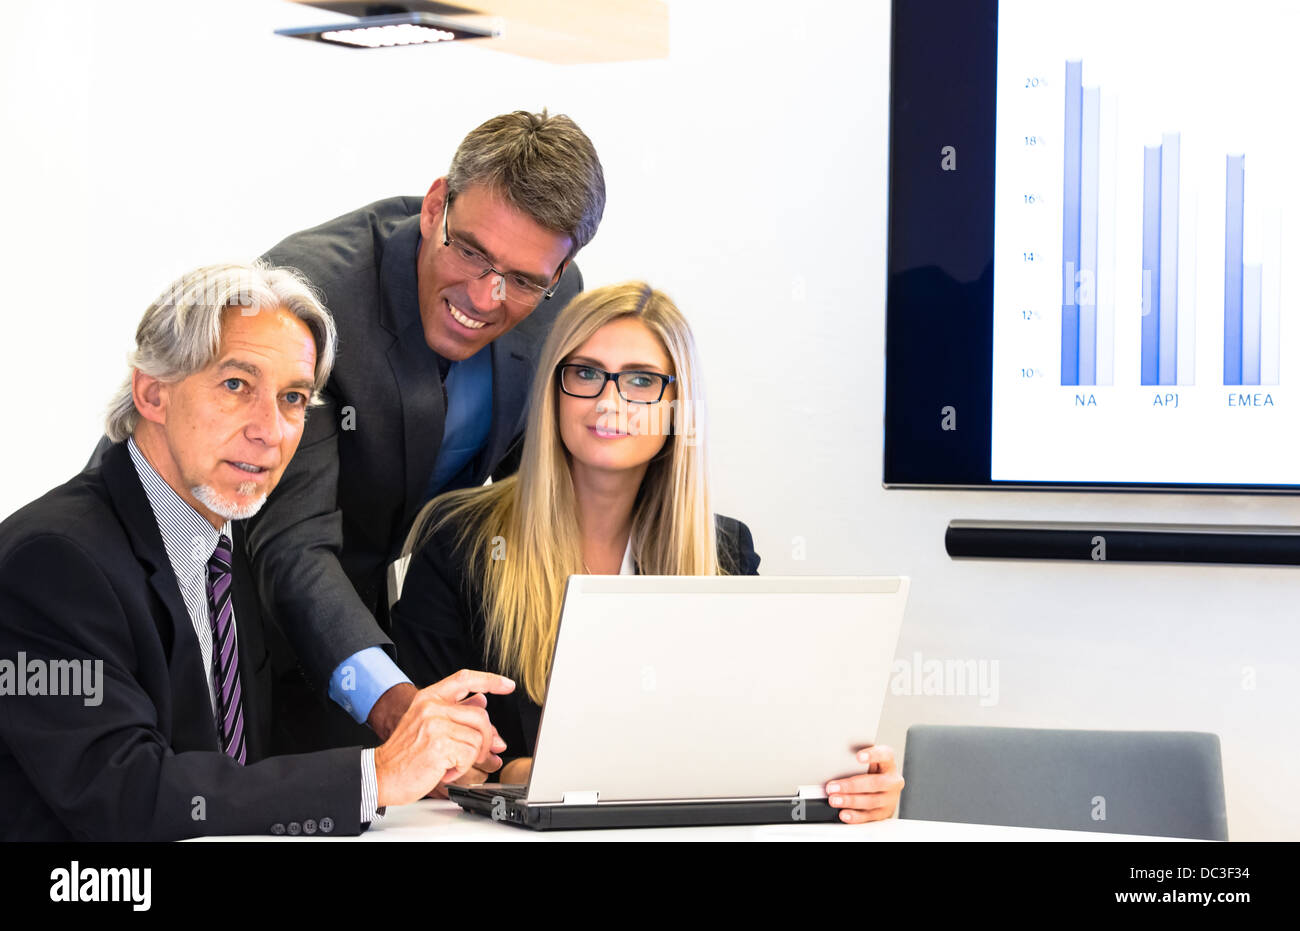 Mixed group in business meeting discussing over the laptop with projection screen, showing the latest sales figures Stock Photo